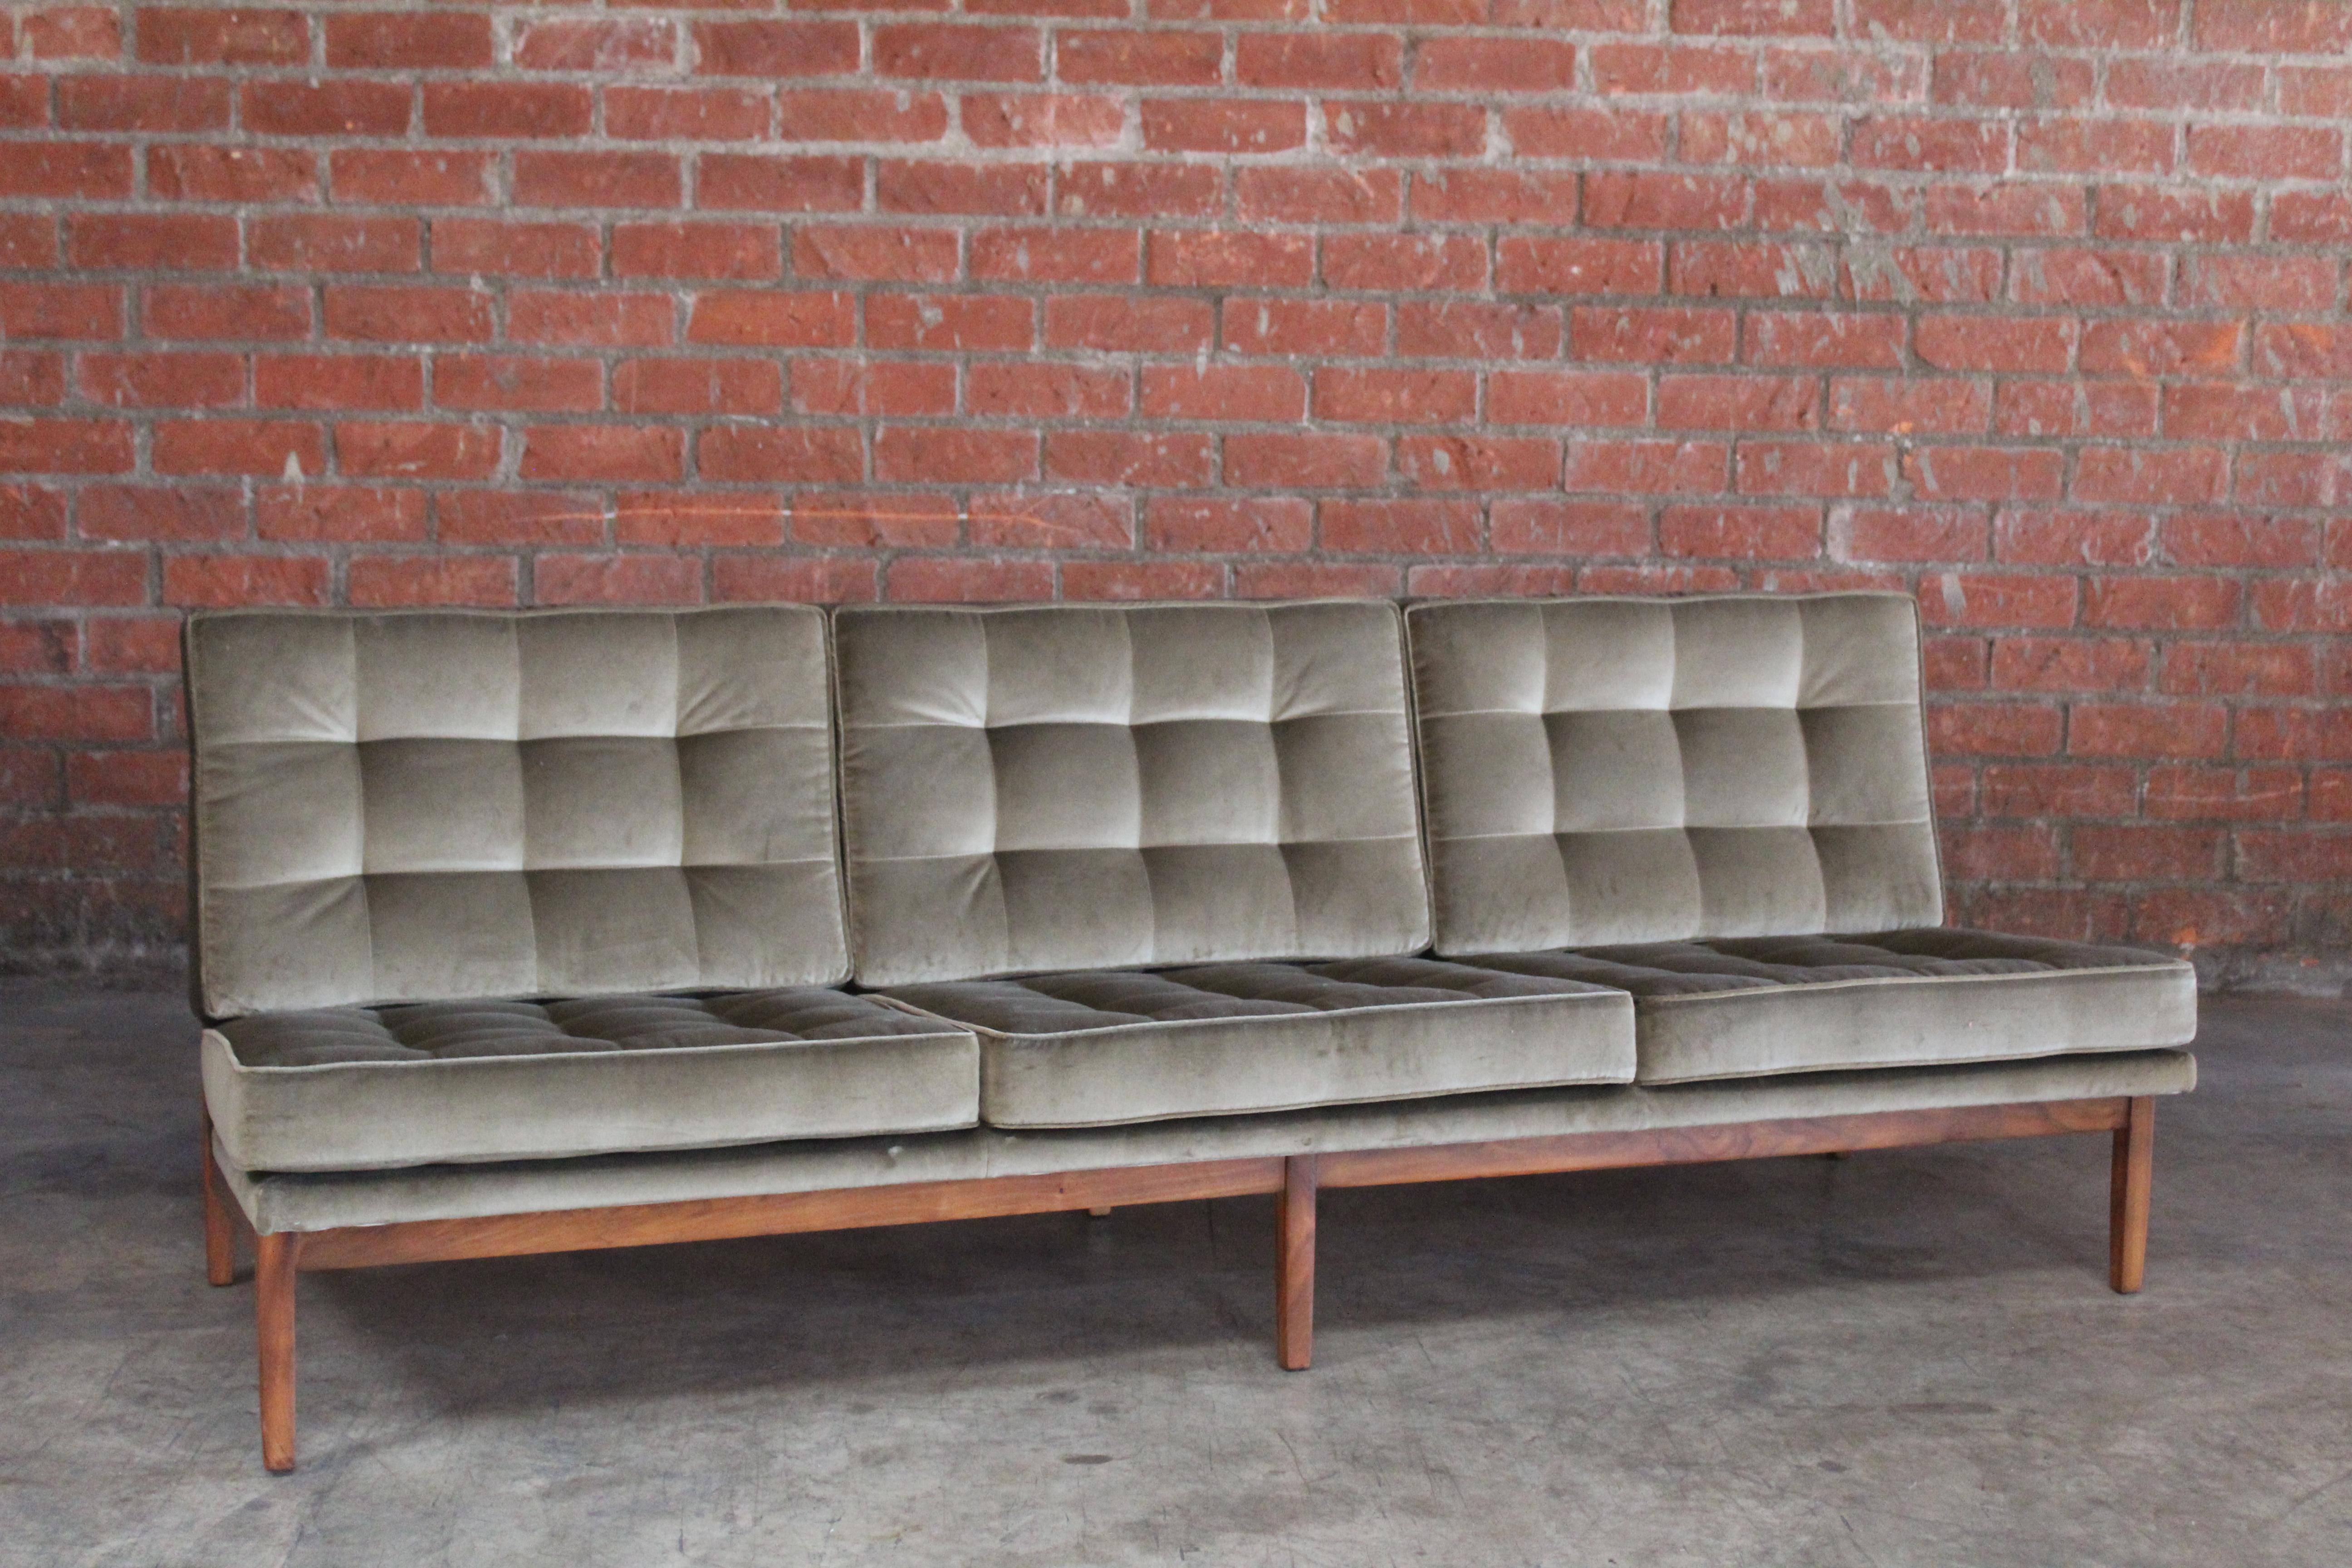 A vintage 1950s sofa designed by Florence Knoll. Completely restored and reupholstered in new Italian cotton velvet in olive green. The walnut frame has been refinished.